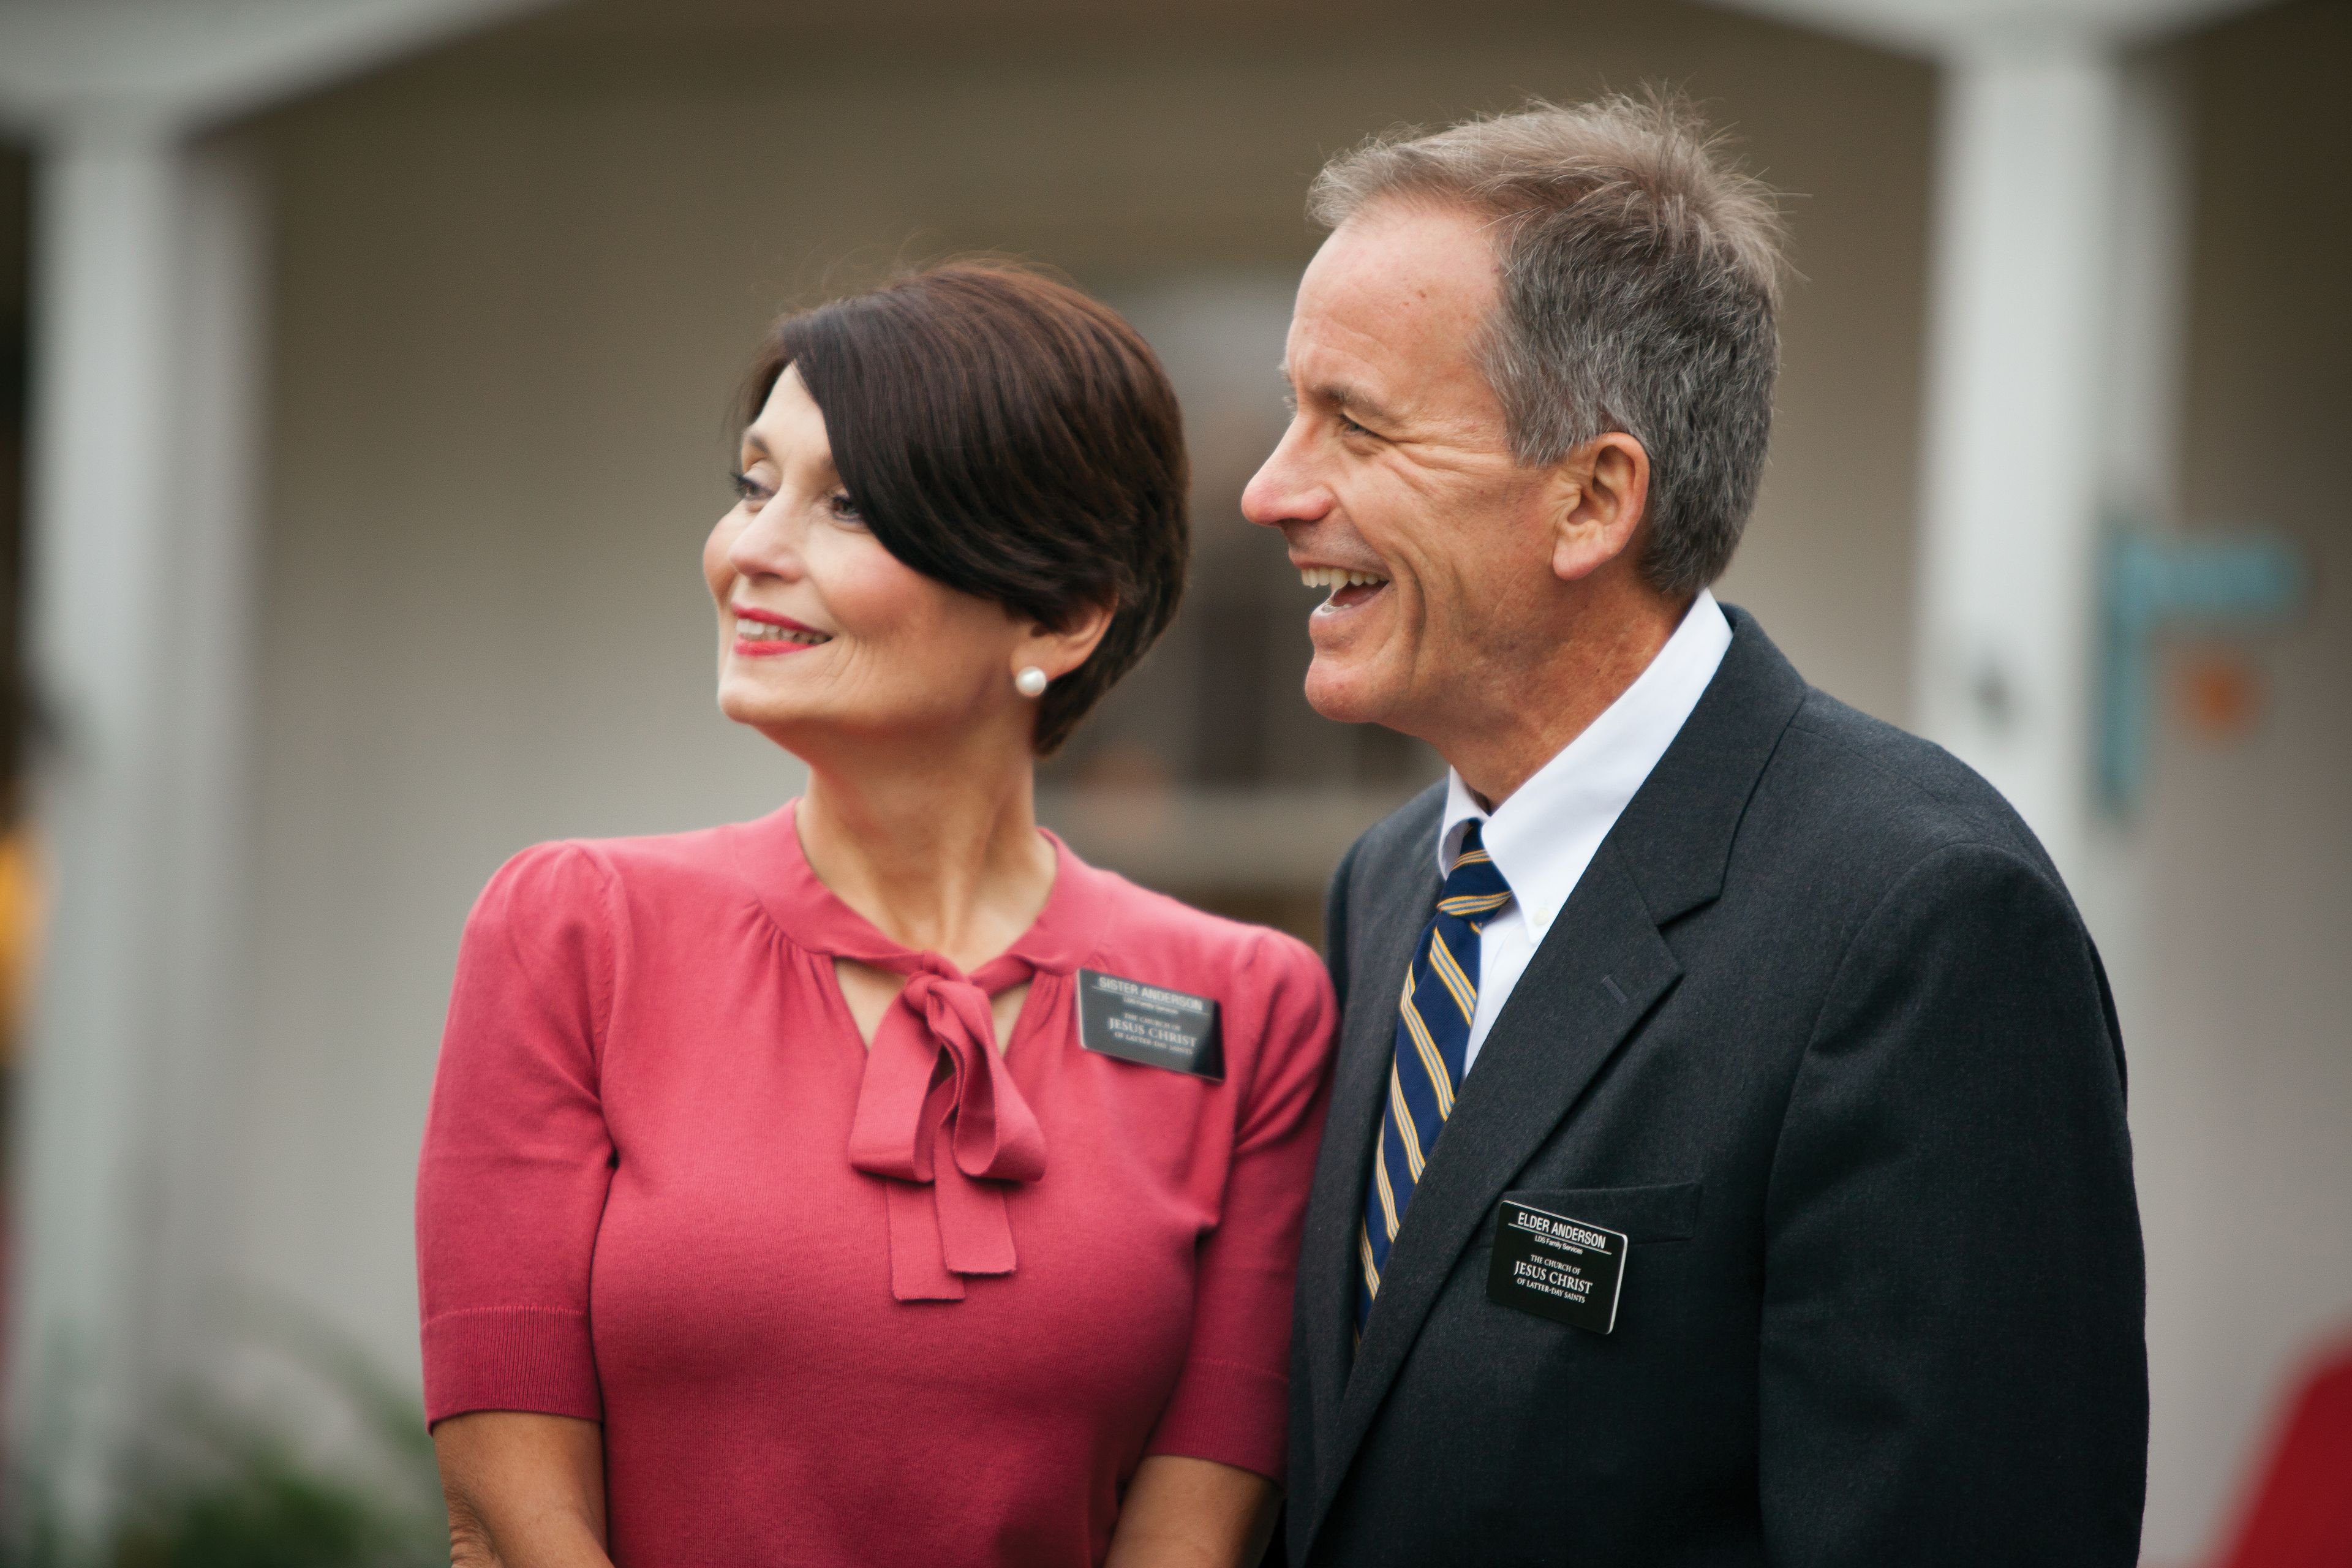 A senior missionary couple standing and smiling.